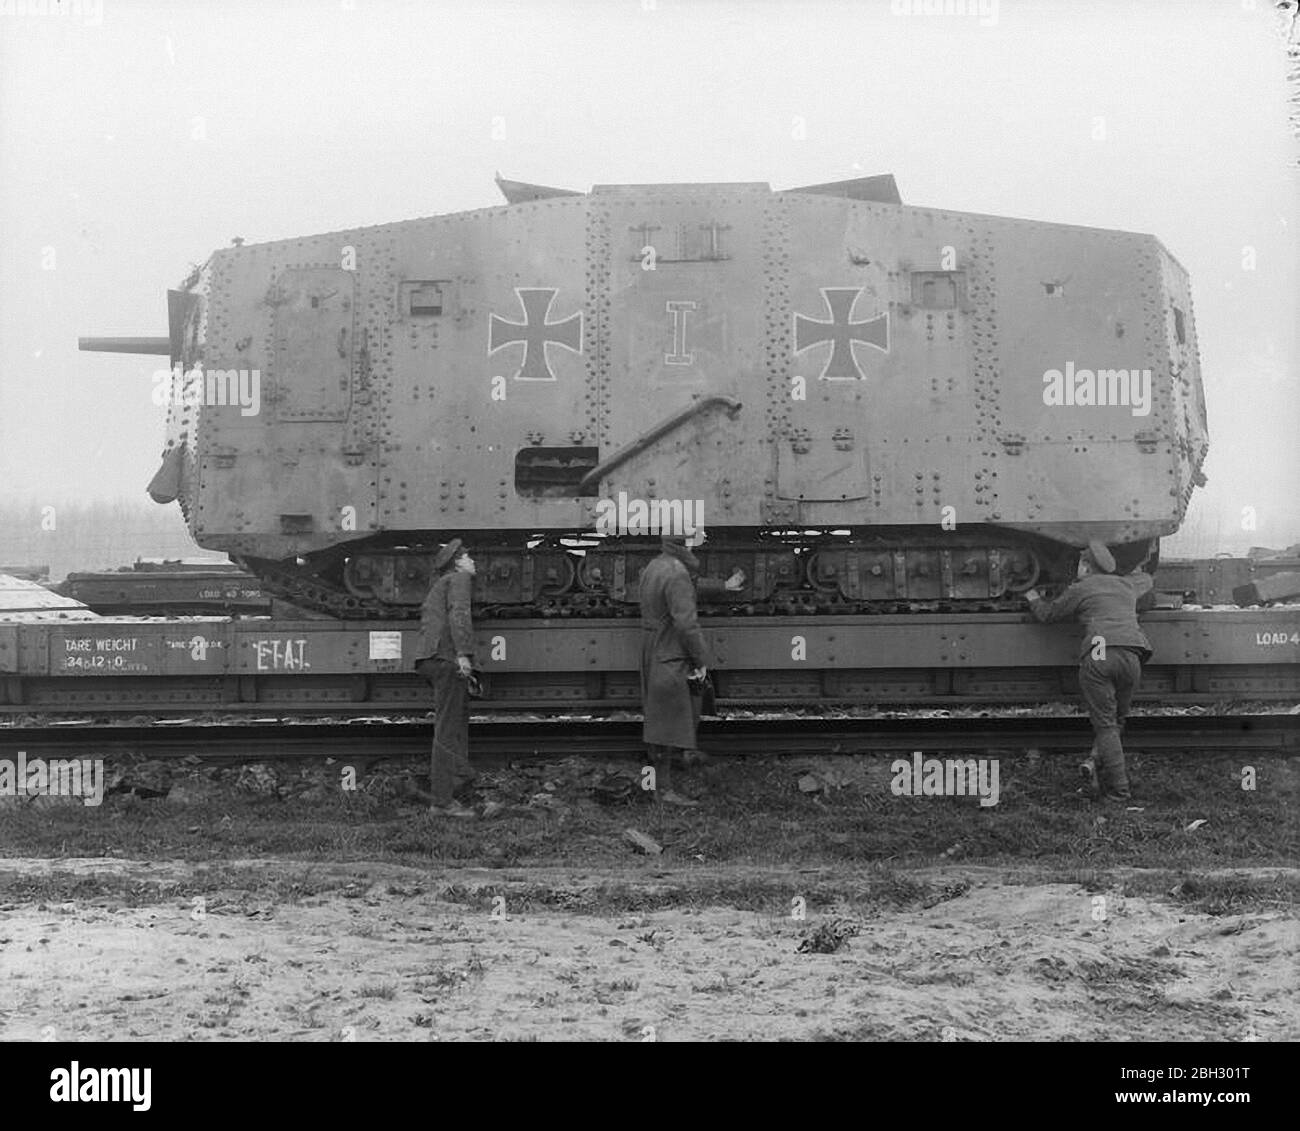 he A7V was a heavy tank introduced by Germany in 1918 during World War I. The A7V was 7.34 m (24 ft 1 in) long and 3 m (9 ft 10 in) wide, and the maximum height was 3.3 m (10 ft 10 in). The crew officially consisted of at least 17 soldiers and one officer: commander (officer, typically a lieutenant), driver, mechanic, mechanic/signaller, 12 infantrymen (six machine gunners, six loaders), and two artillerymen (main gunner and loader). A7Vs often went into action with as many as 25 men on boardTHE BRITISH ARMY ON THE WESTERN FRONT, 1914-1918 (Q 9775) Captured German A7V tank on a railway carriag Stock Photo